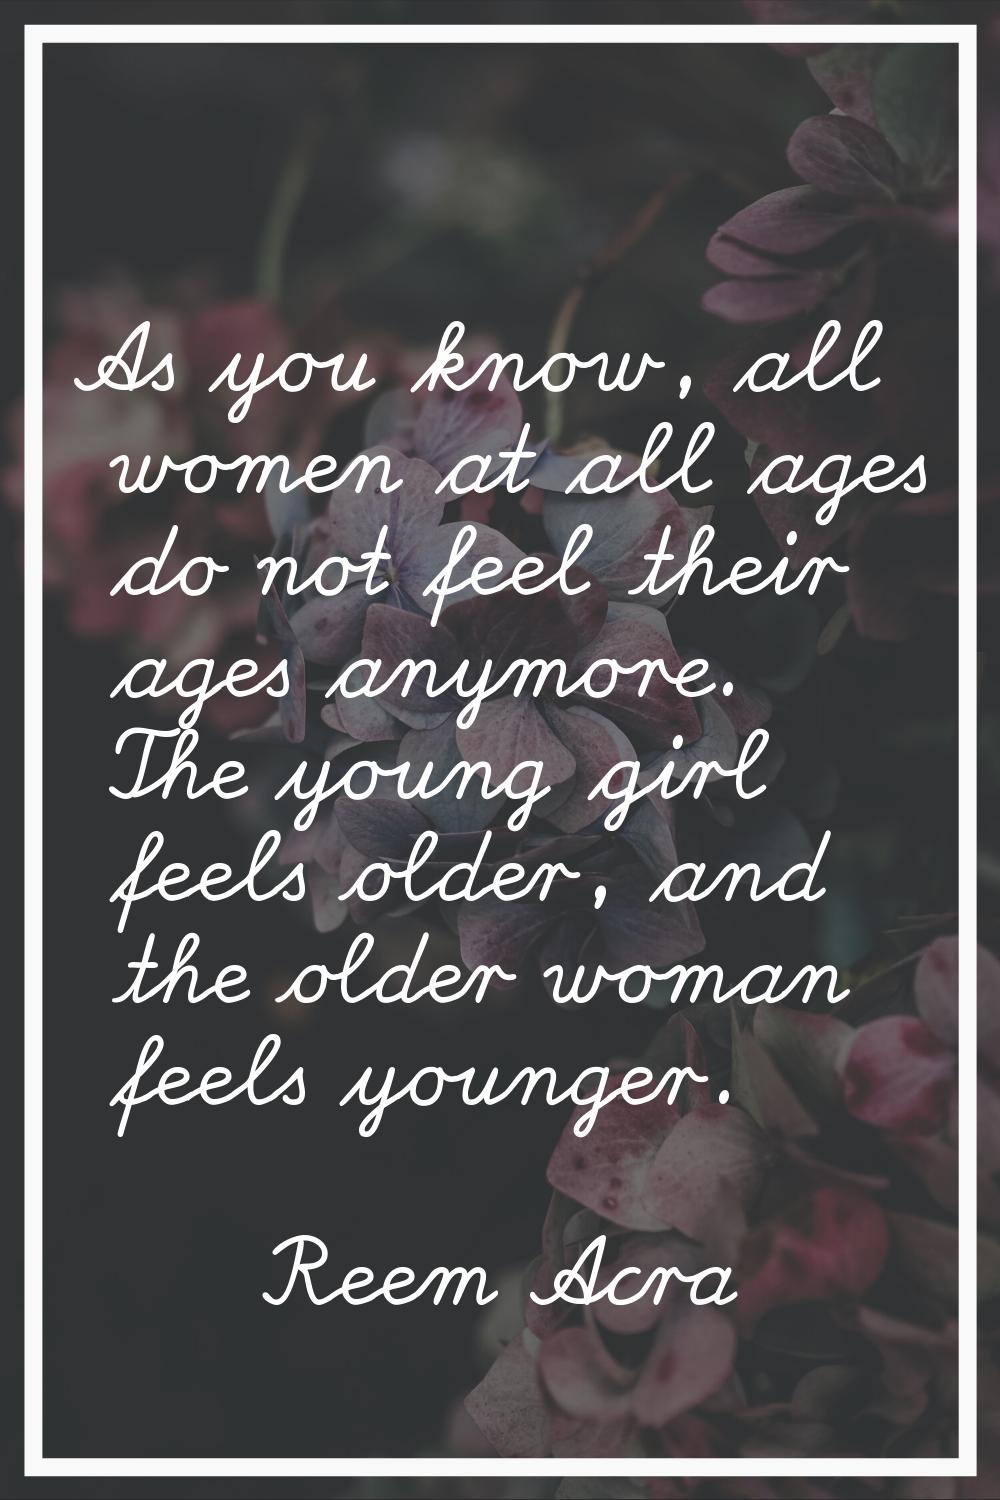 As you know, all women at all ages do not feel their ages anymore. The young girl feels older, and 